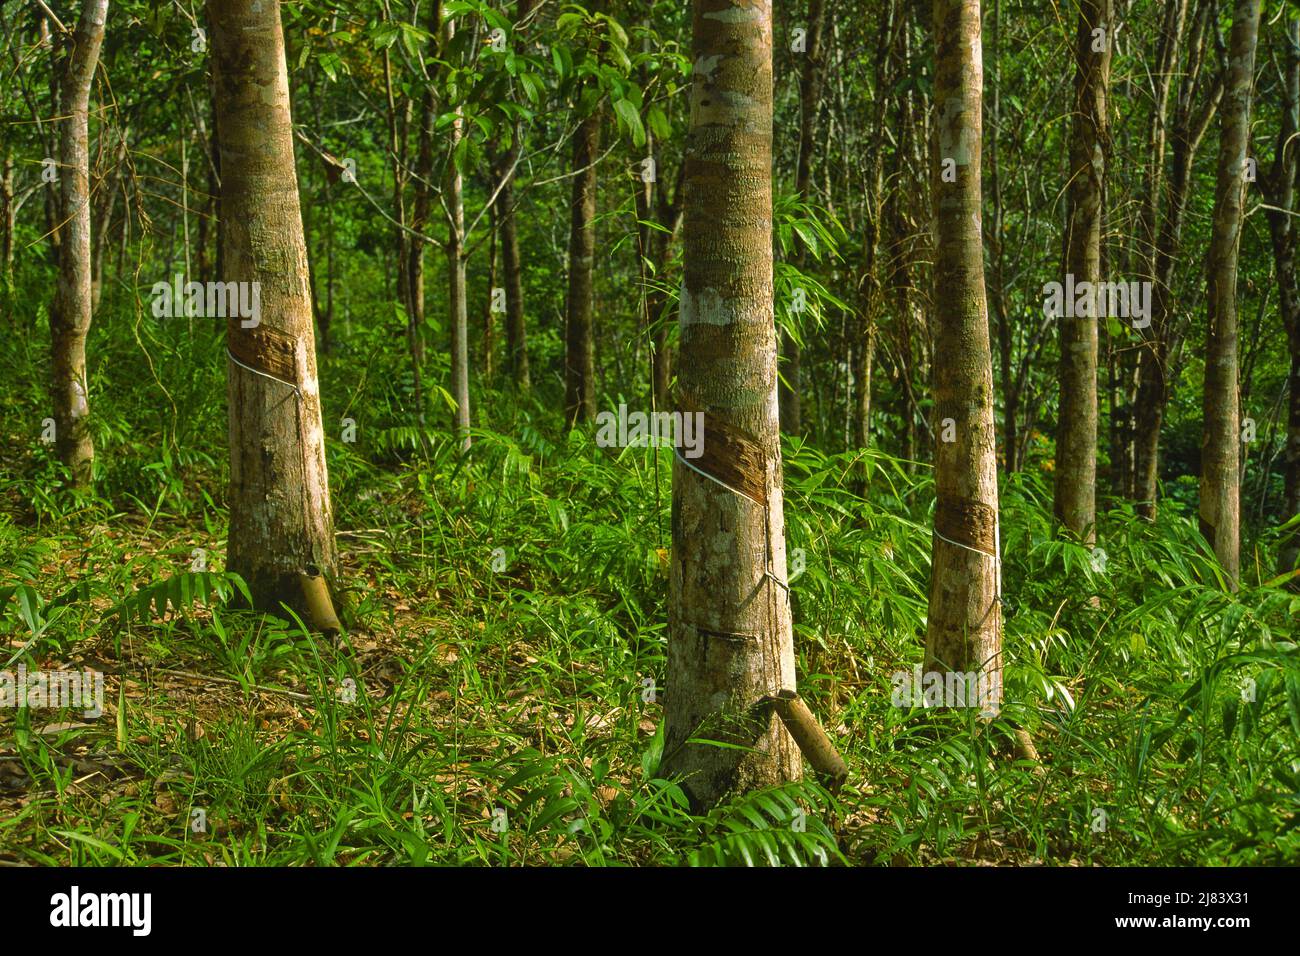 Sustainable agriculture, Iban tribe, former headhunters, rainforest Skrang River, Sarawak, Borneo, Malaysia. Tapping rubber tree for latex. Stock Photo